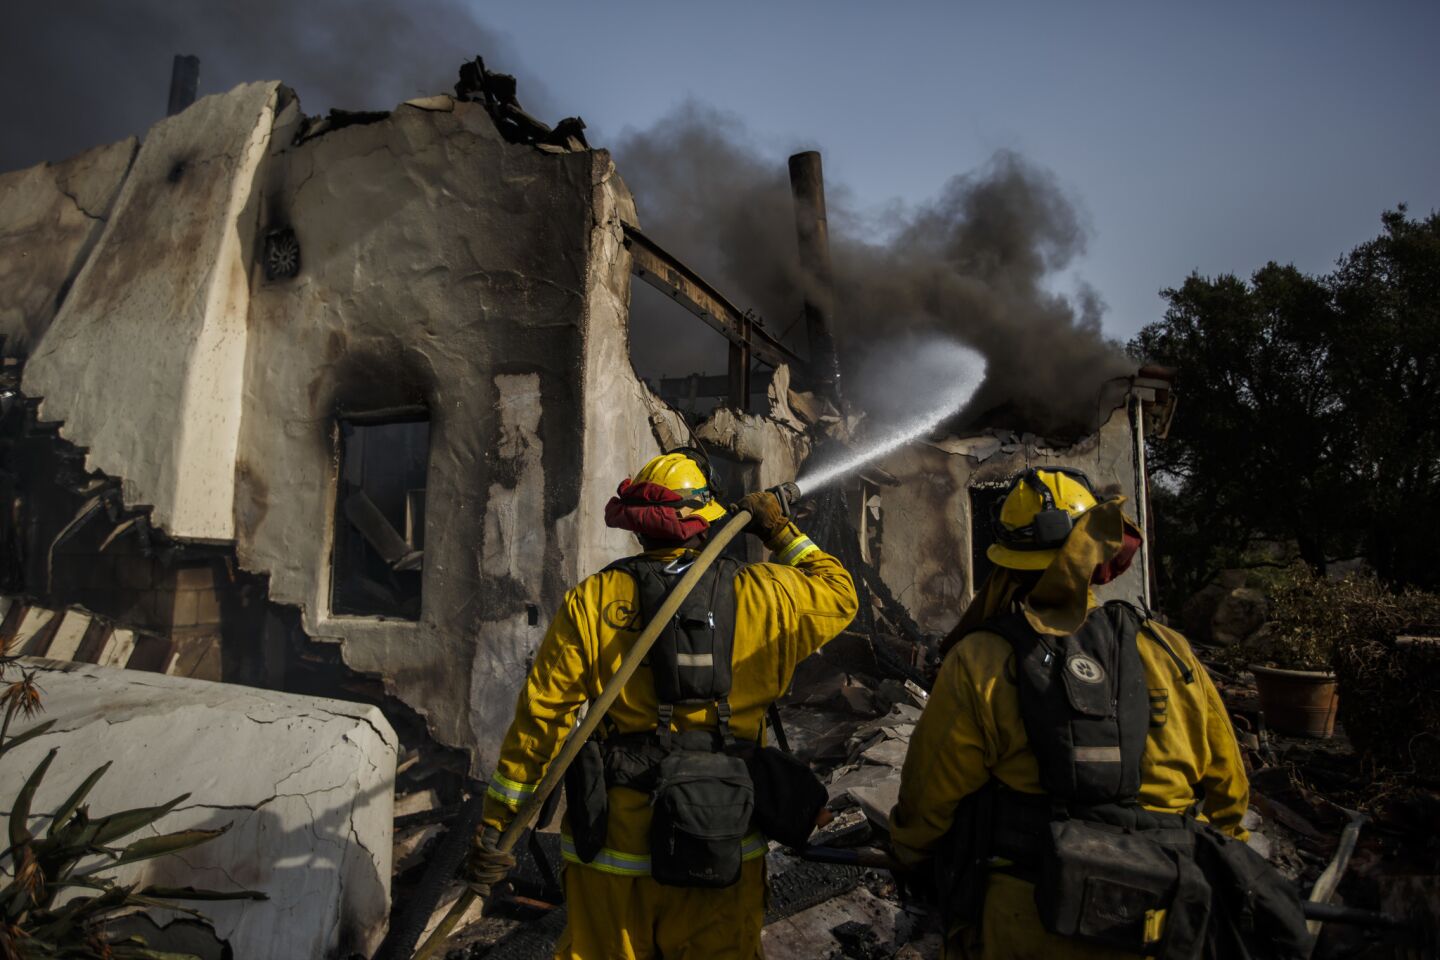 Humboldt County firefighters Bobby Gray, left, hoses down smoldering flames inside a destroyed home, as Kellee Stoehr, right looks on, after the Thomas Fire burned in Montecito, Calif. on Sunday.